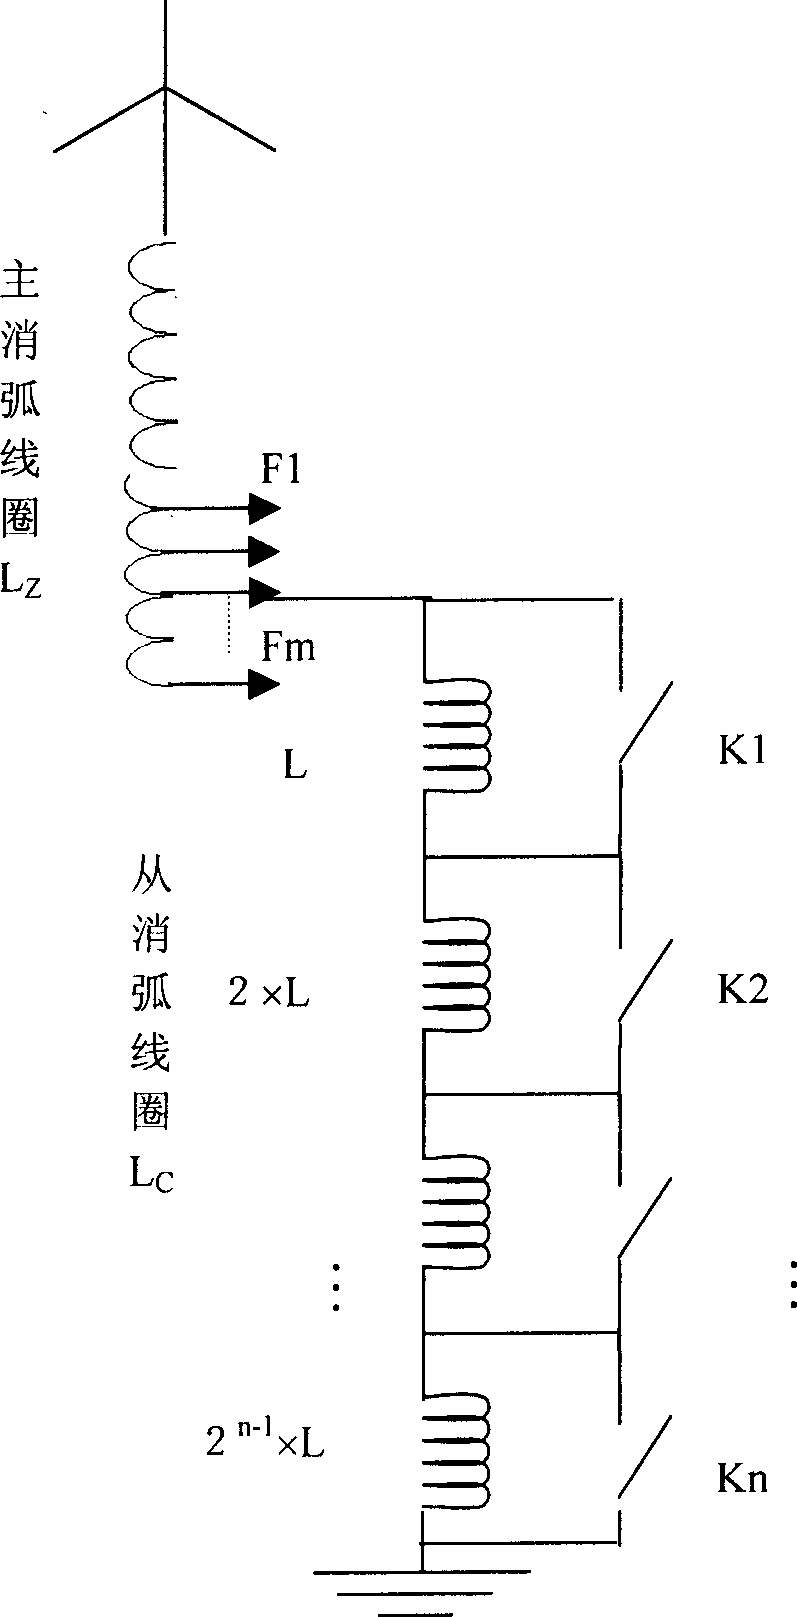 Master-slave trimming resistance type arc suppression coil